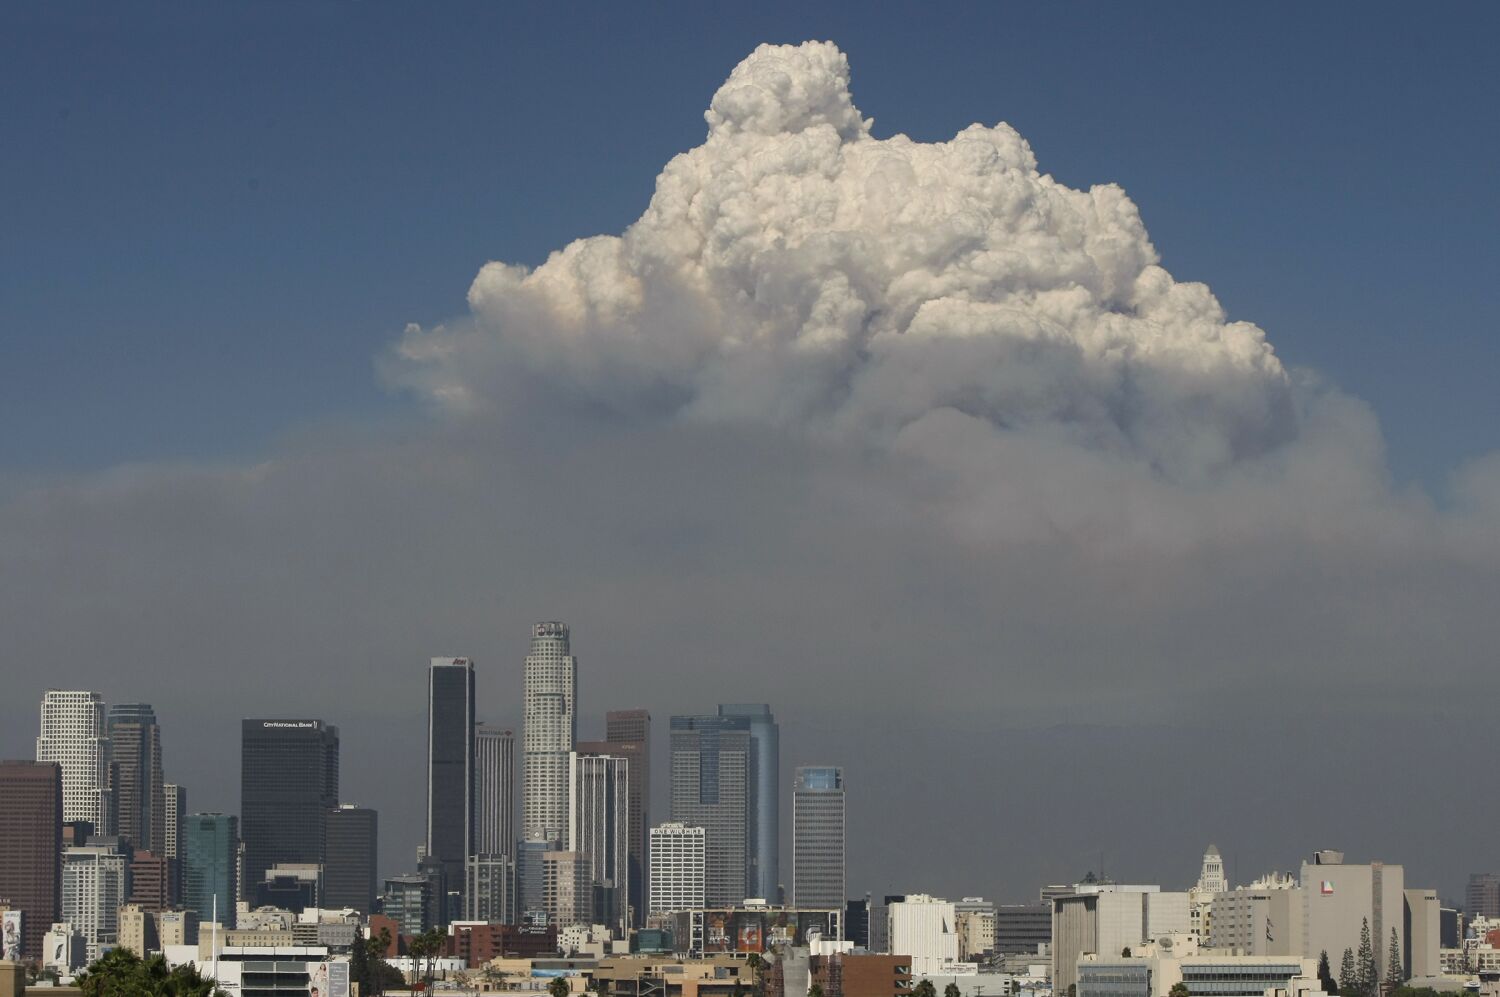 It's not windy, but wildfires are still spreading in California